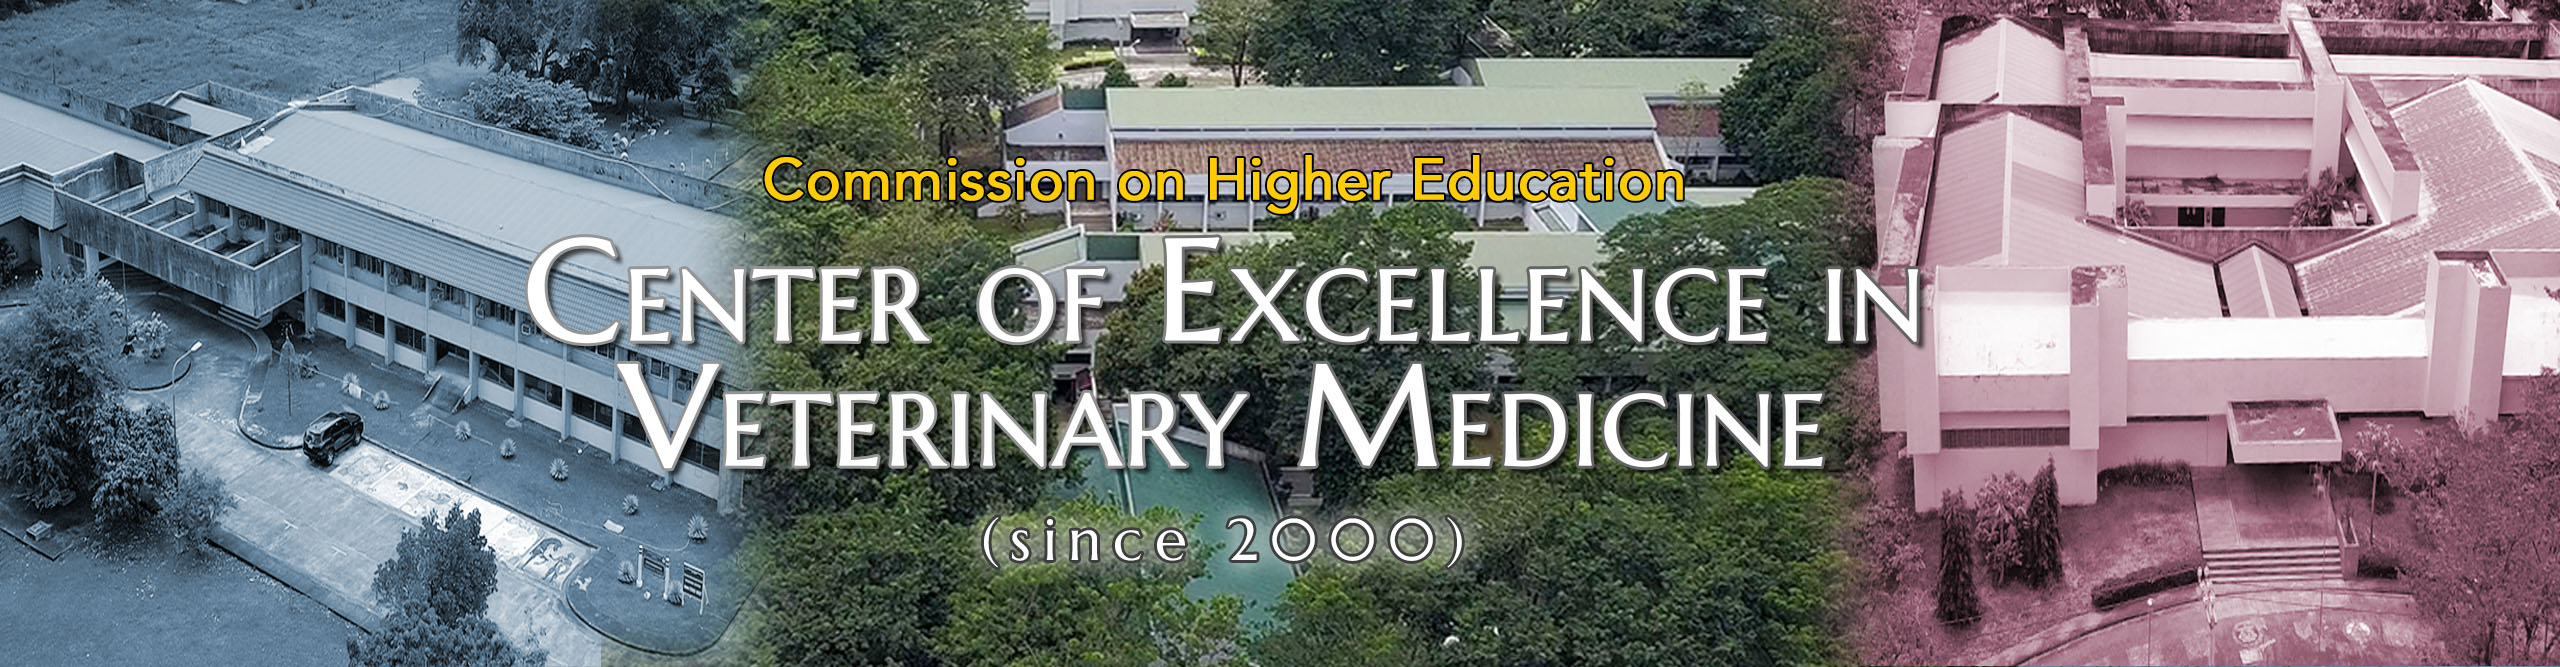 CHED-CVM CENTER OF EXCELLENCE